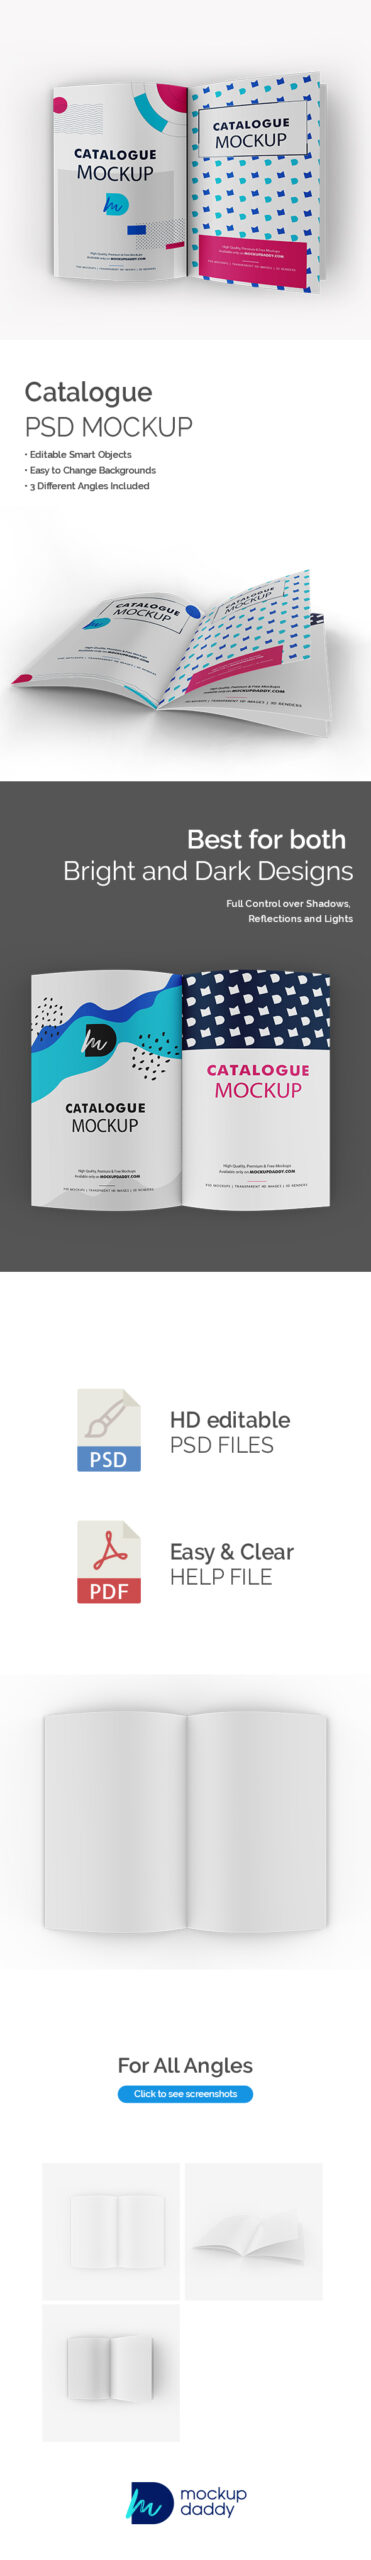 Open A5 landscape catalogue mockup with customizable pages